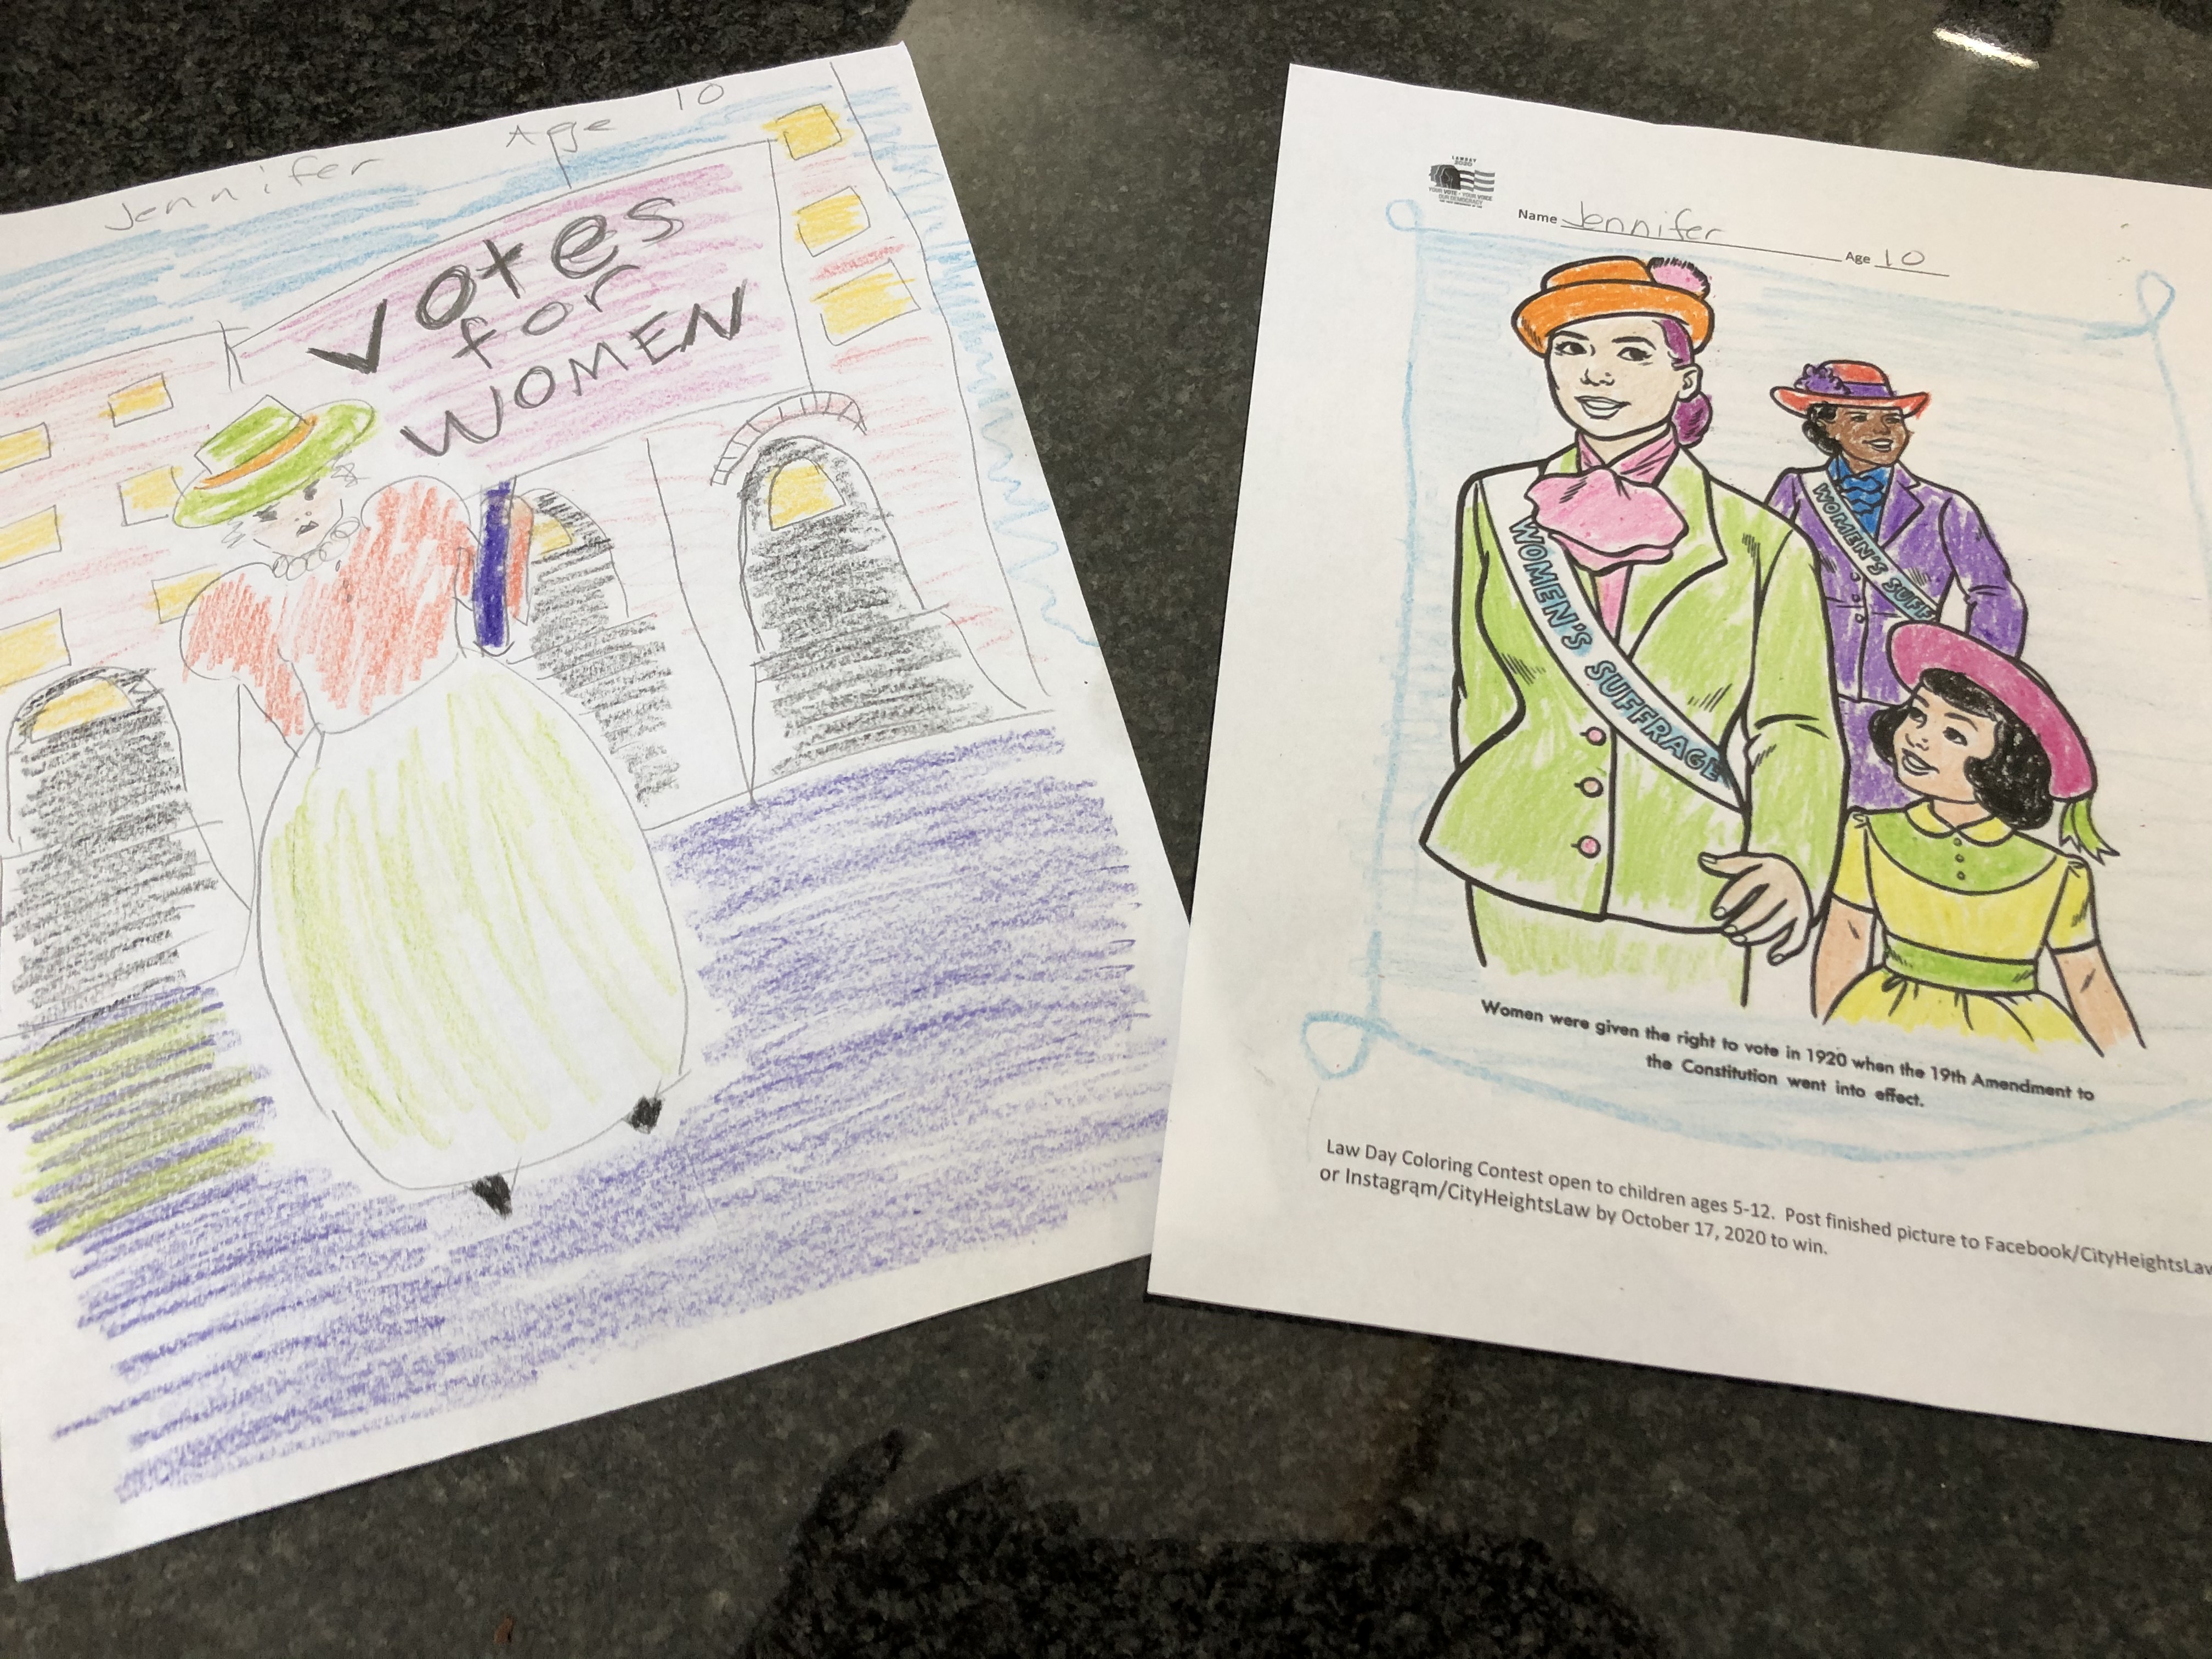 examples of child's coloring page and original artwork about women's right to vote.